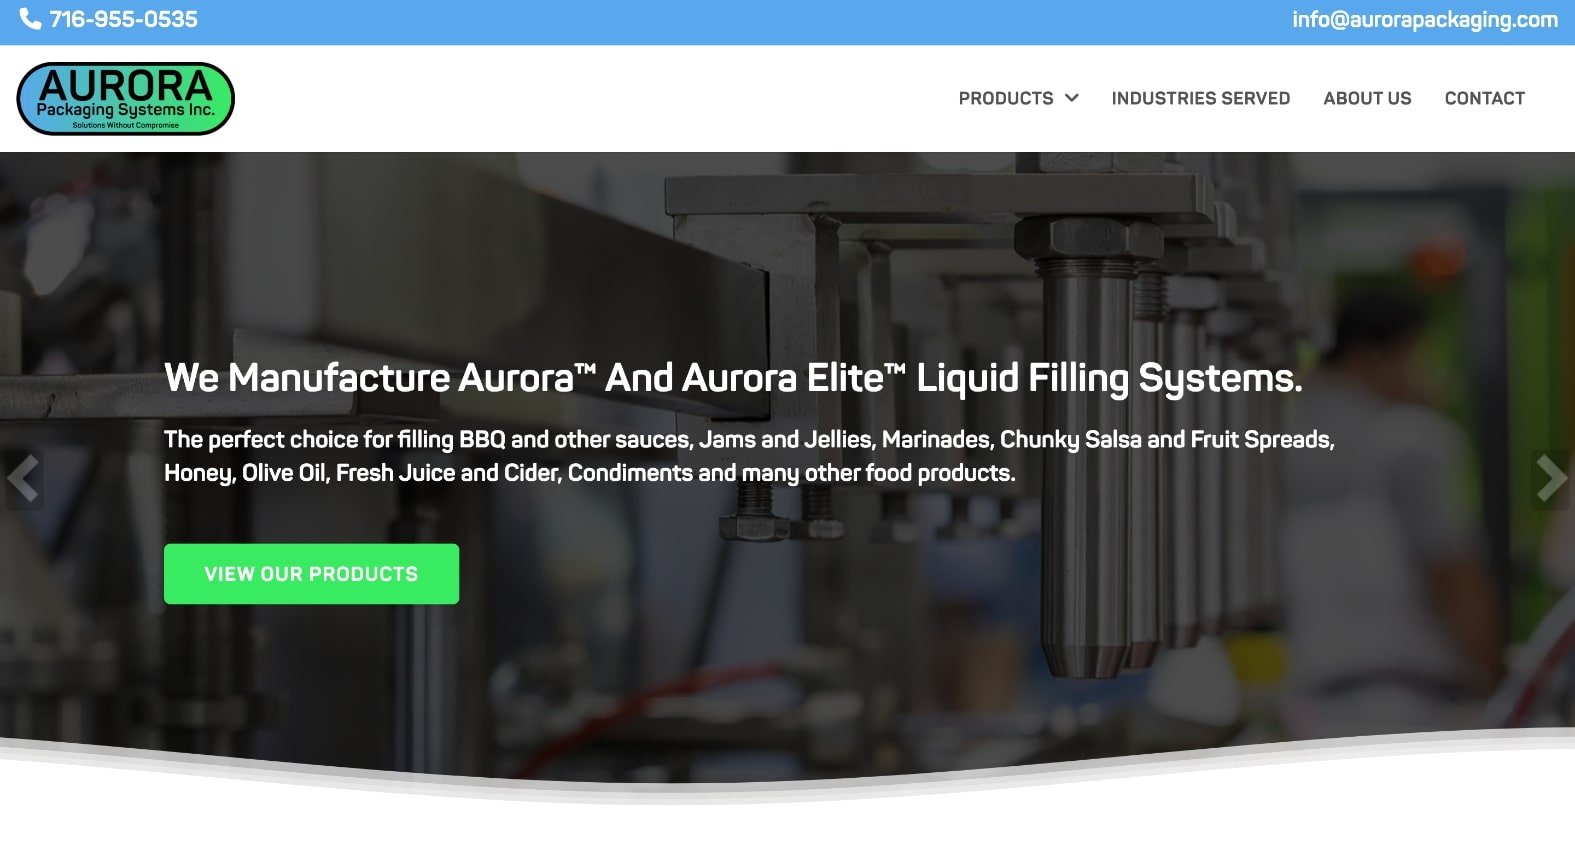 Aurora Packaging Systems, Inc.